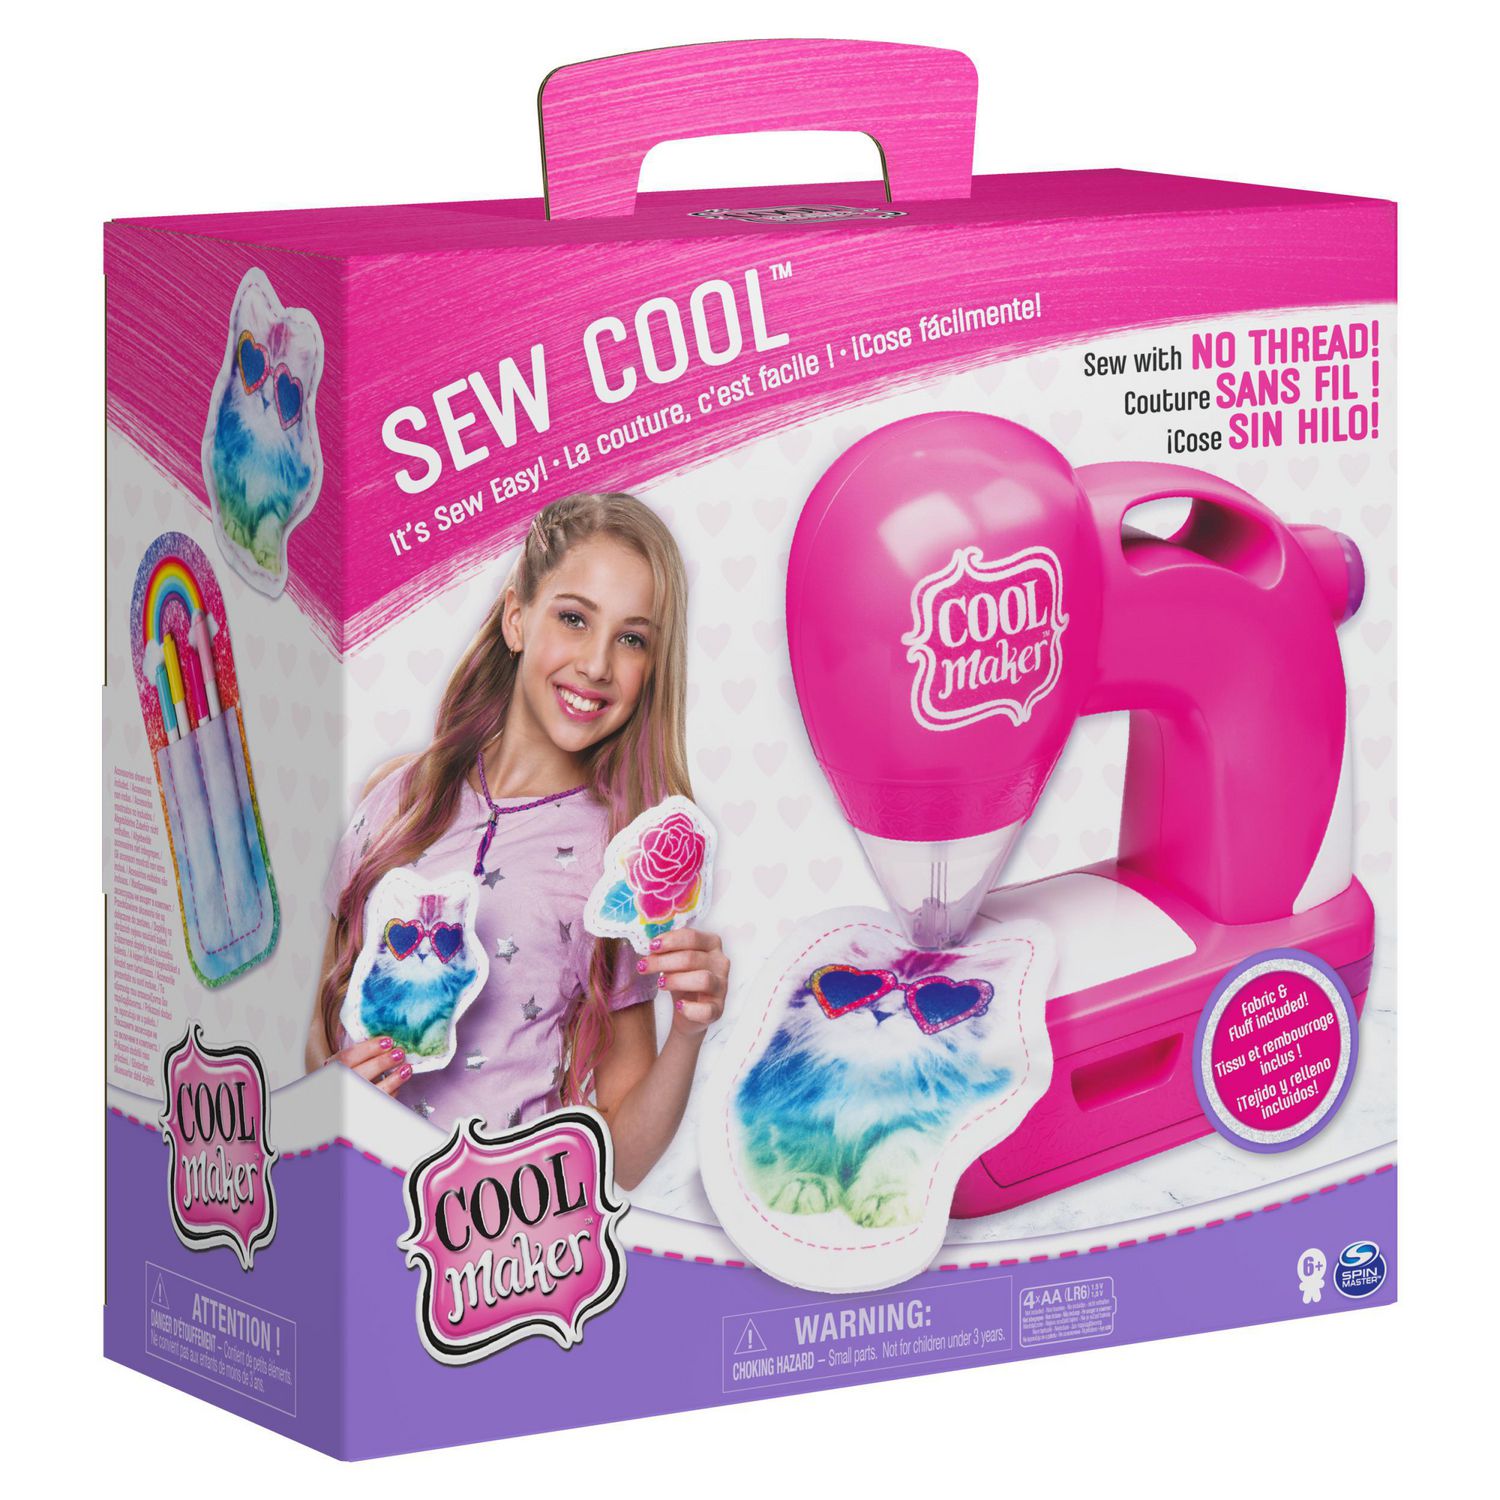 Sew Cool Sewing Machine with 5 Trendy Projects & Fabric - Walmart.ca